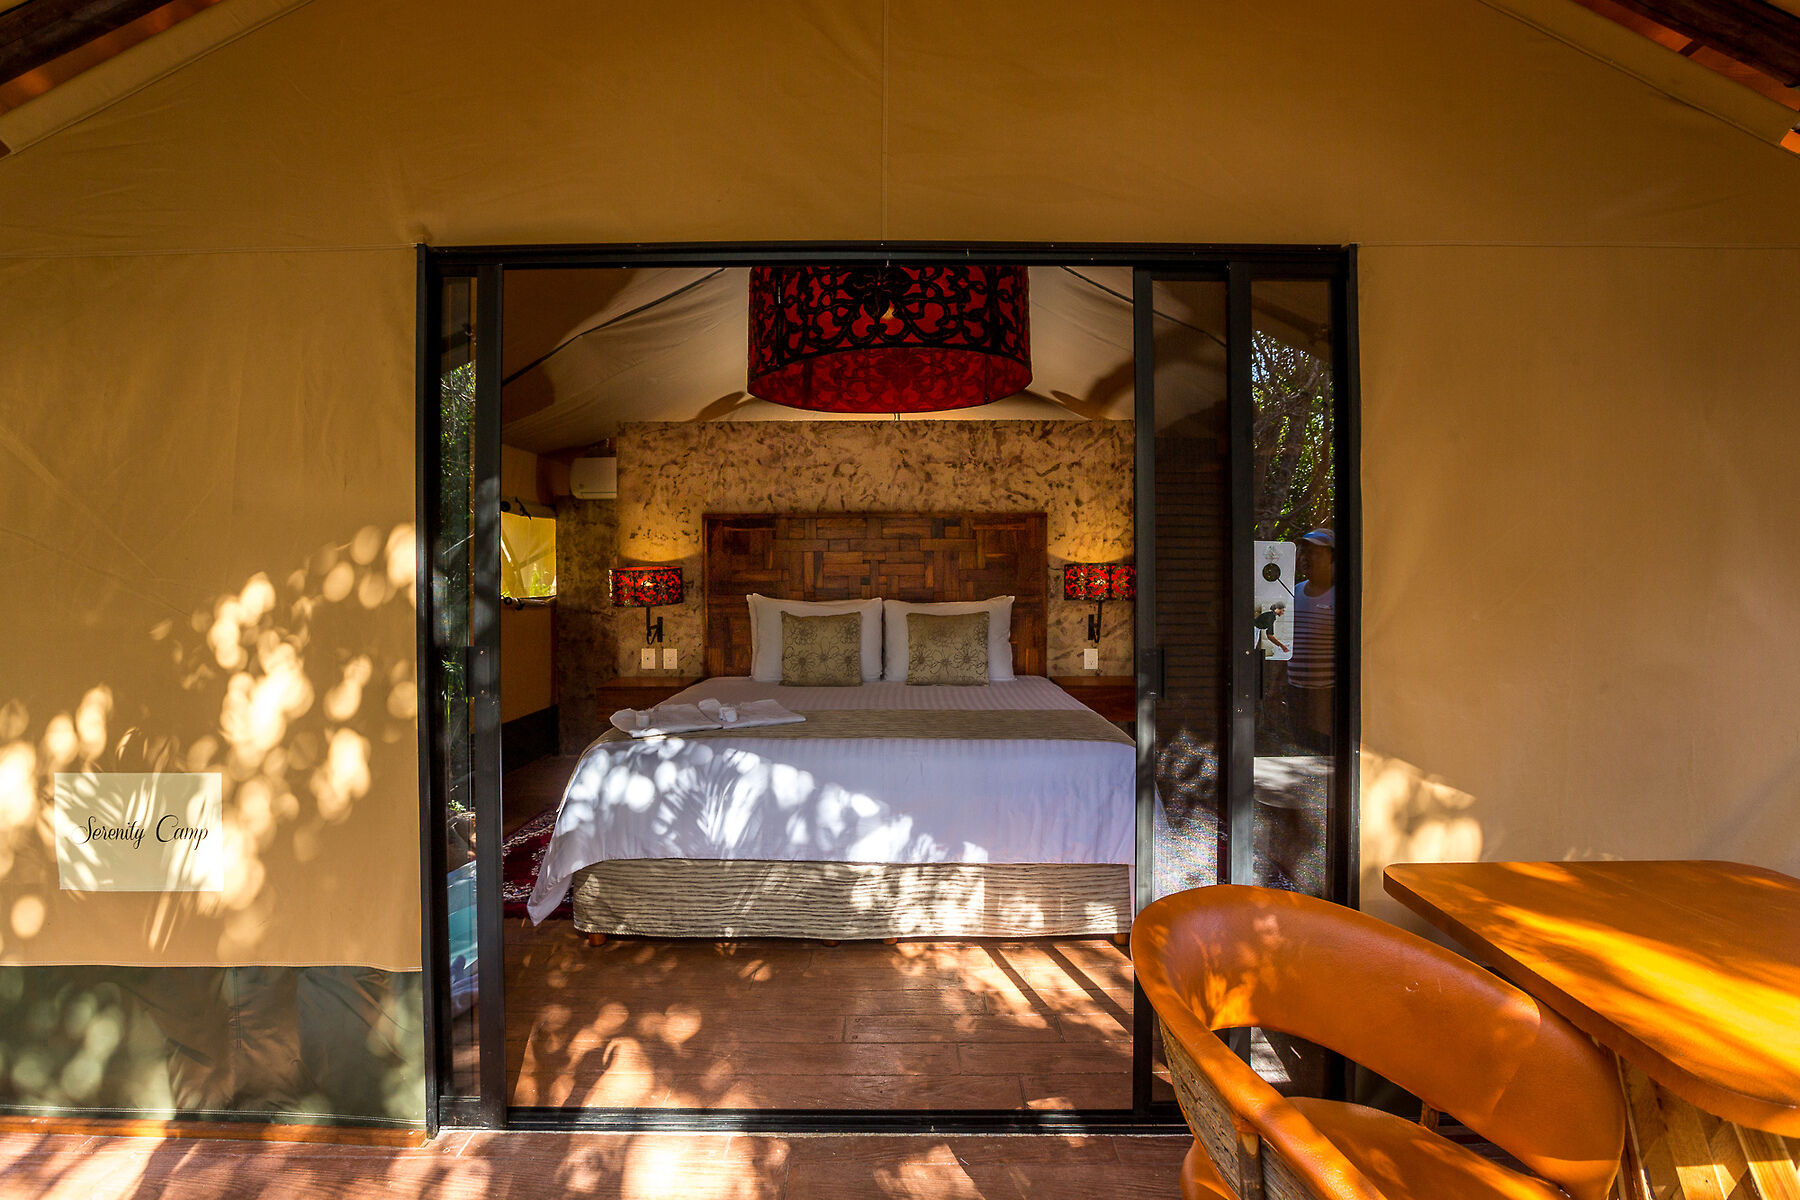 Serenity Eco Luxury Tented Camp by Xperience Hotels